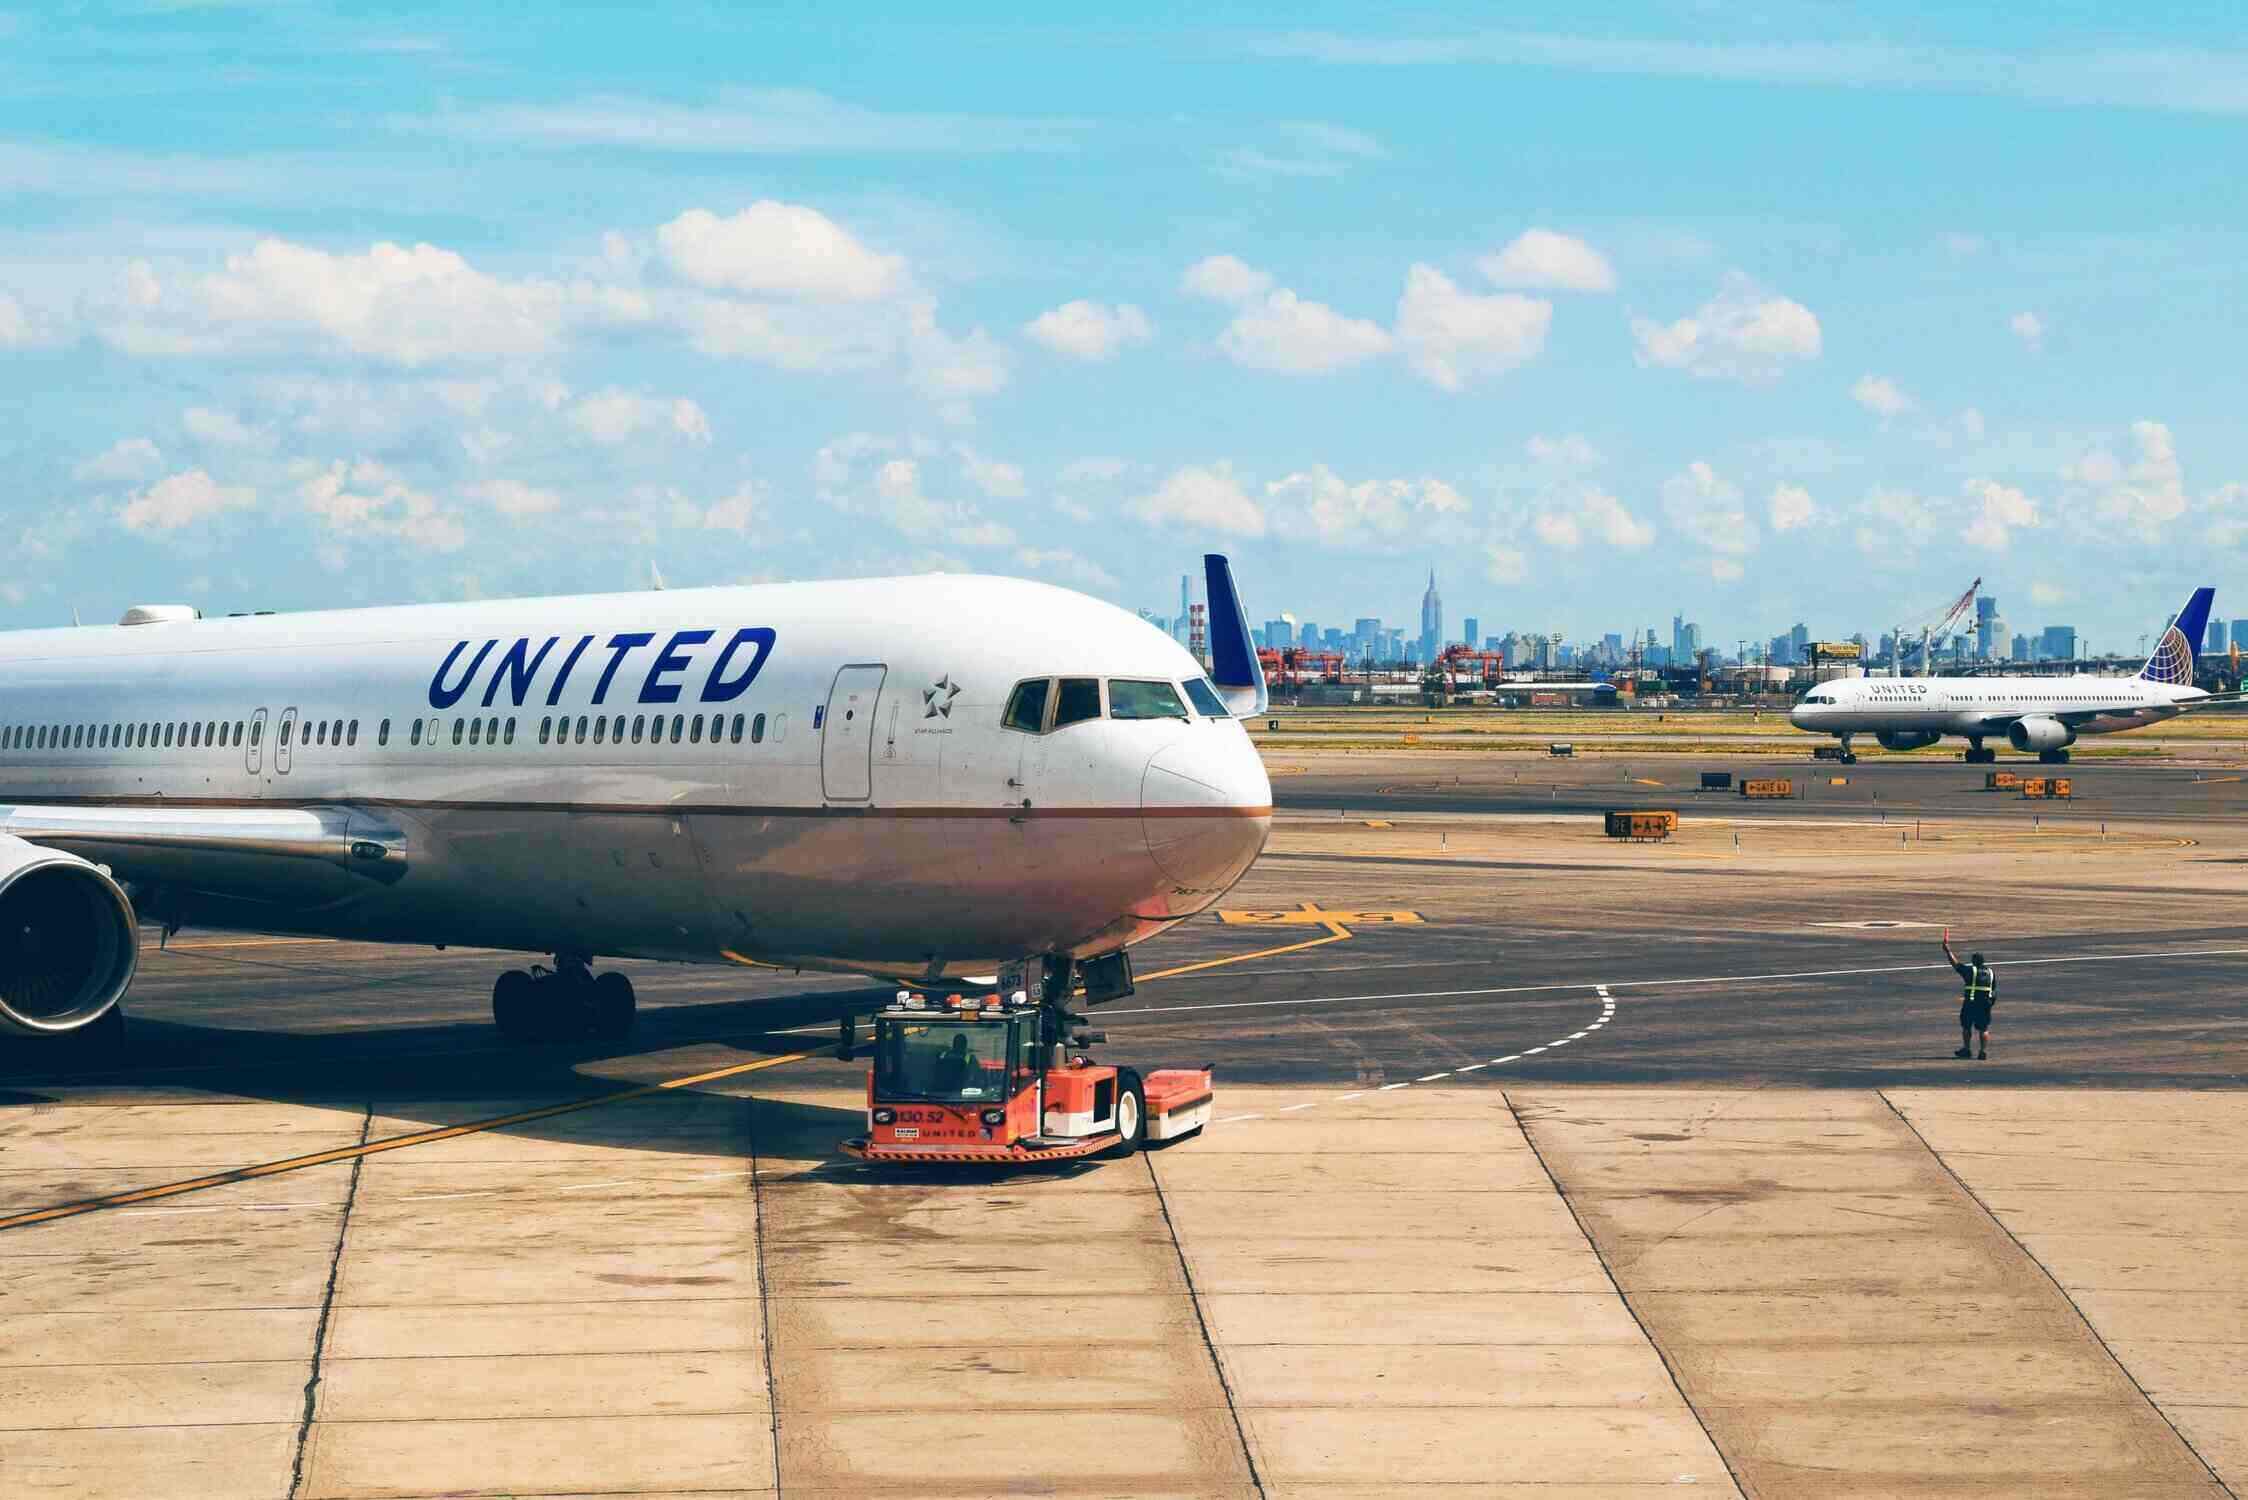 united airlines airplane sits on tarmac